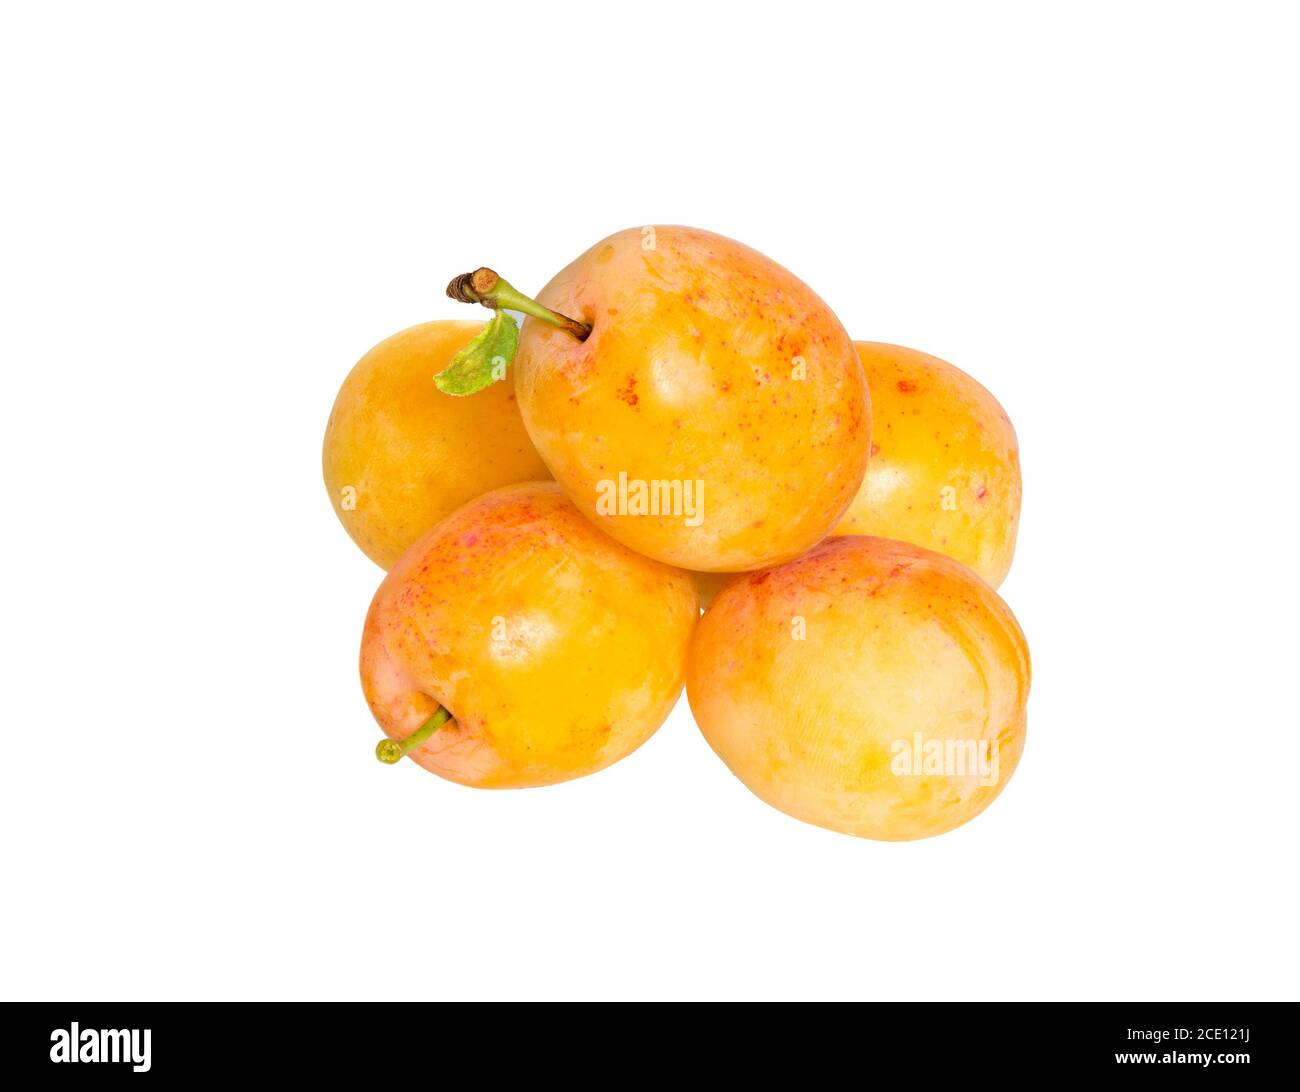 Plums isolated on White Background. Juicy yellow plums heap close up. Stock Photo